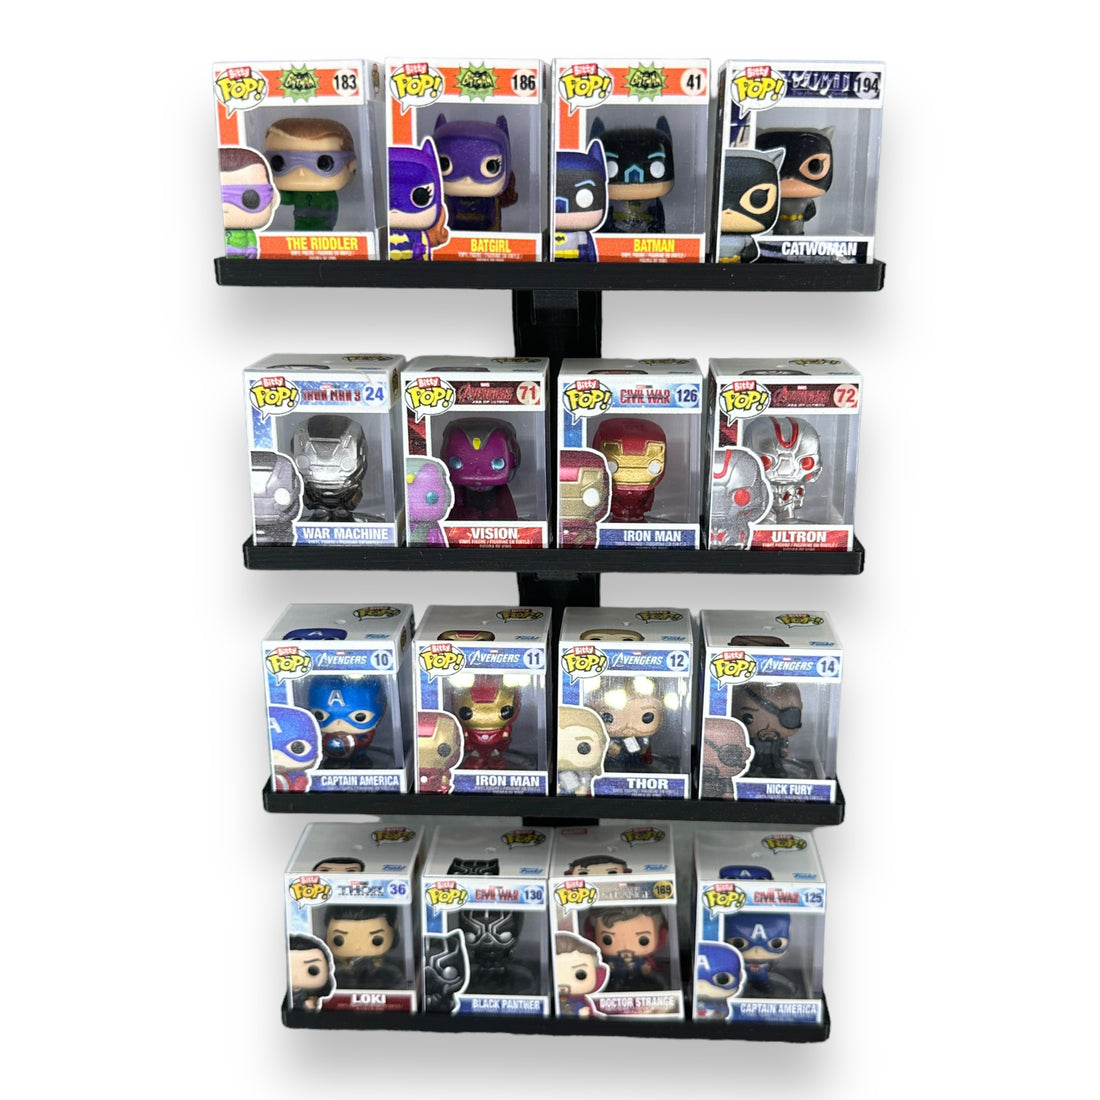 New options for keeping your Bitty Pops organized and displayed!